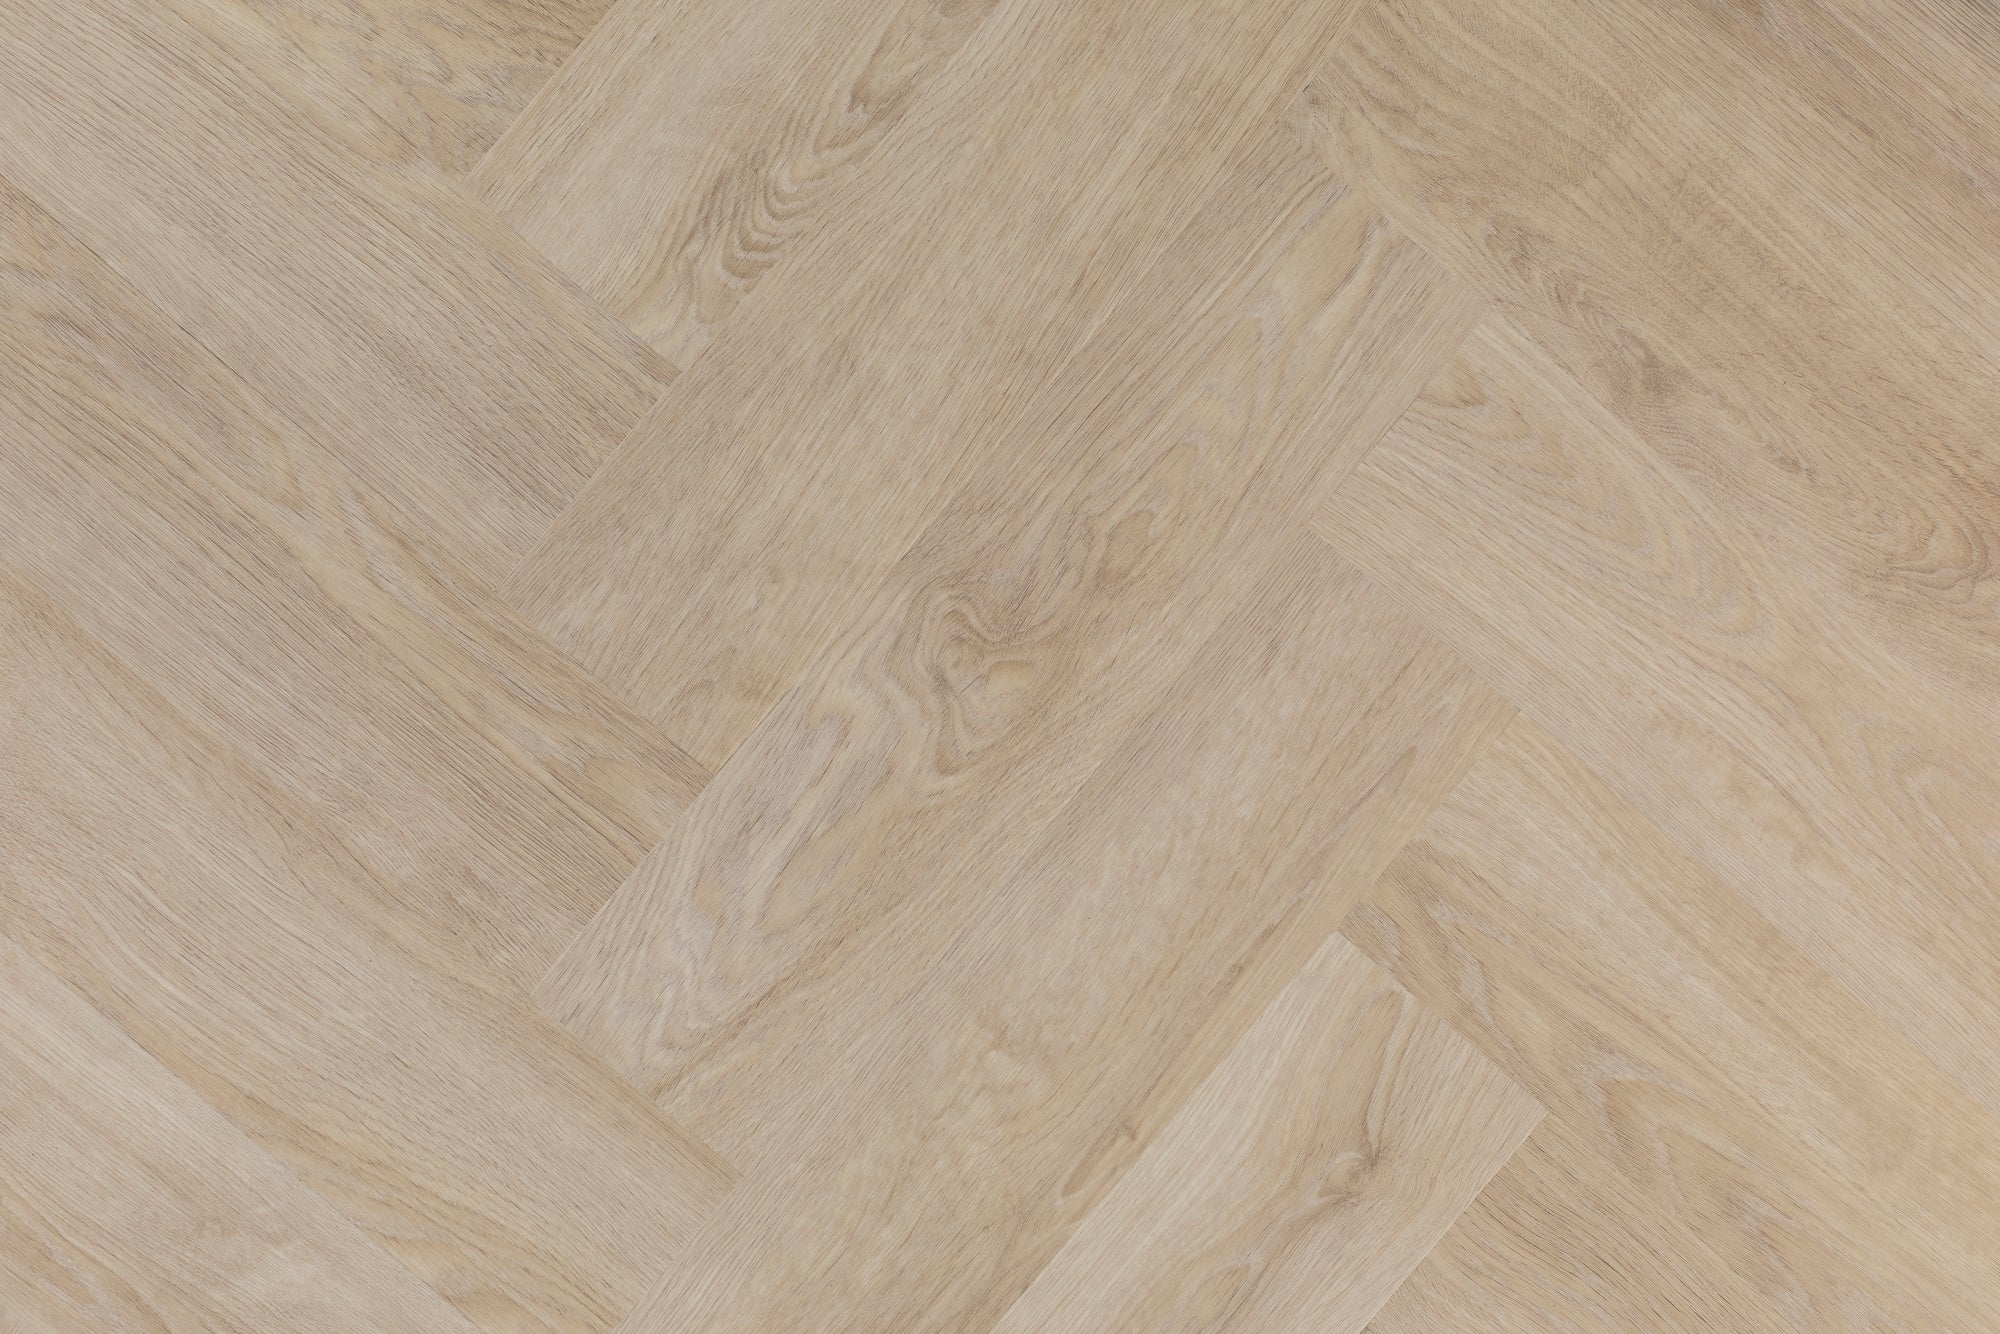 White Washed Glue Down herringbone luxury vinyl plank flooring from our vinyl flooring collection